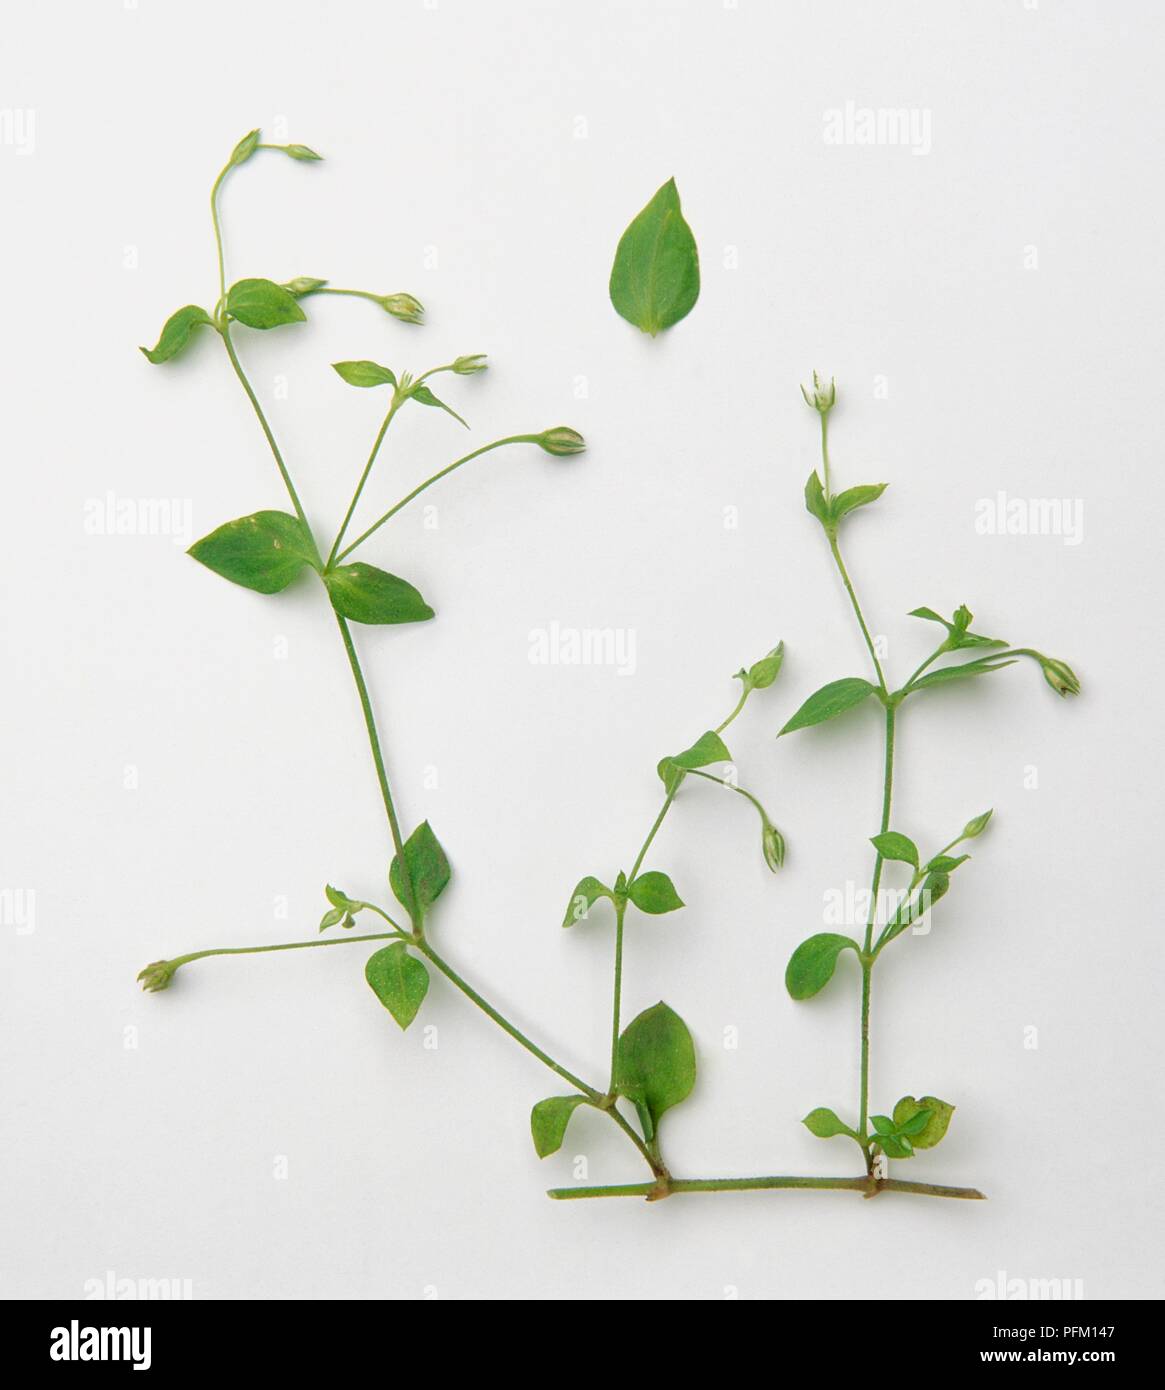 Moehringia trinervia (Three-nerved sandwort), branch with green leaves and flower buds Stock Photo